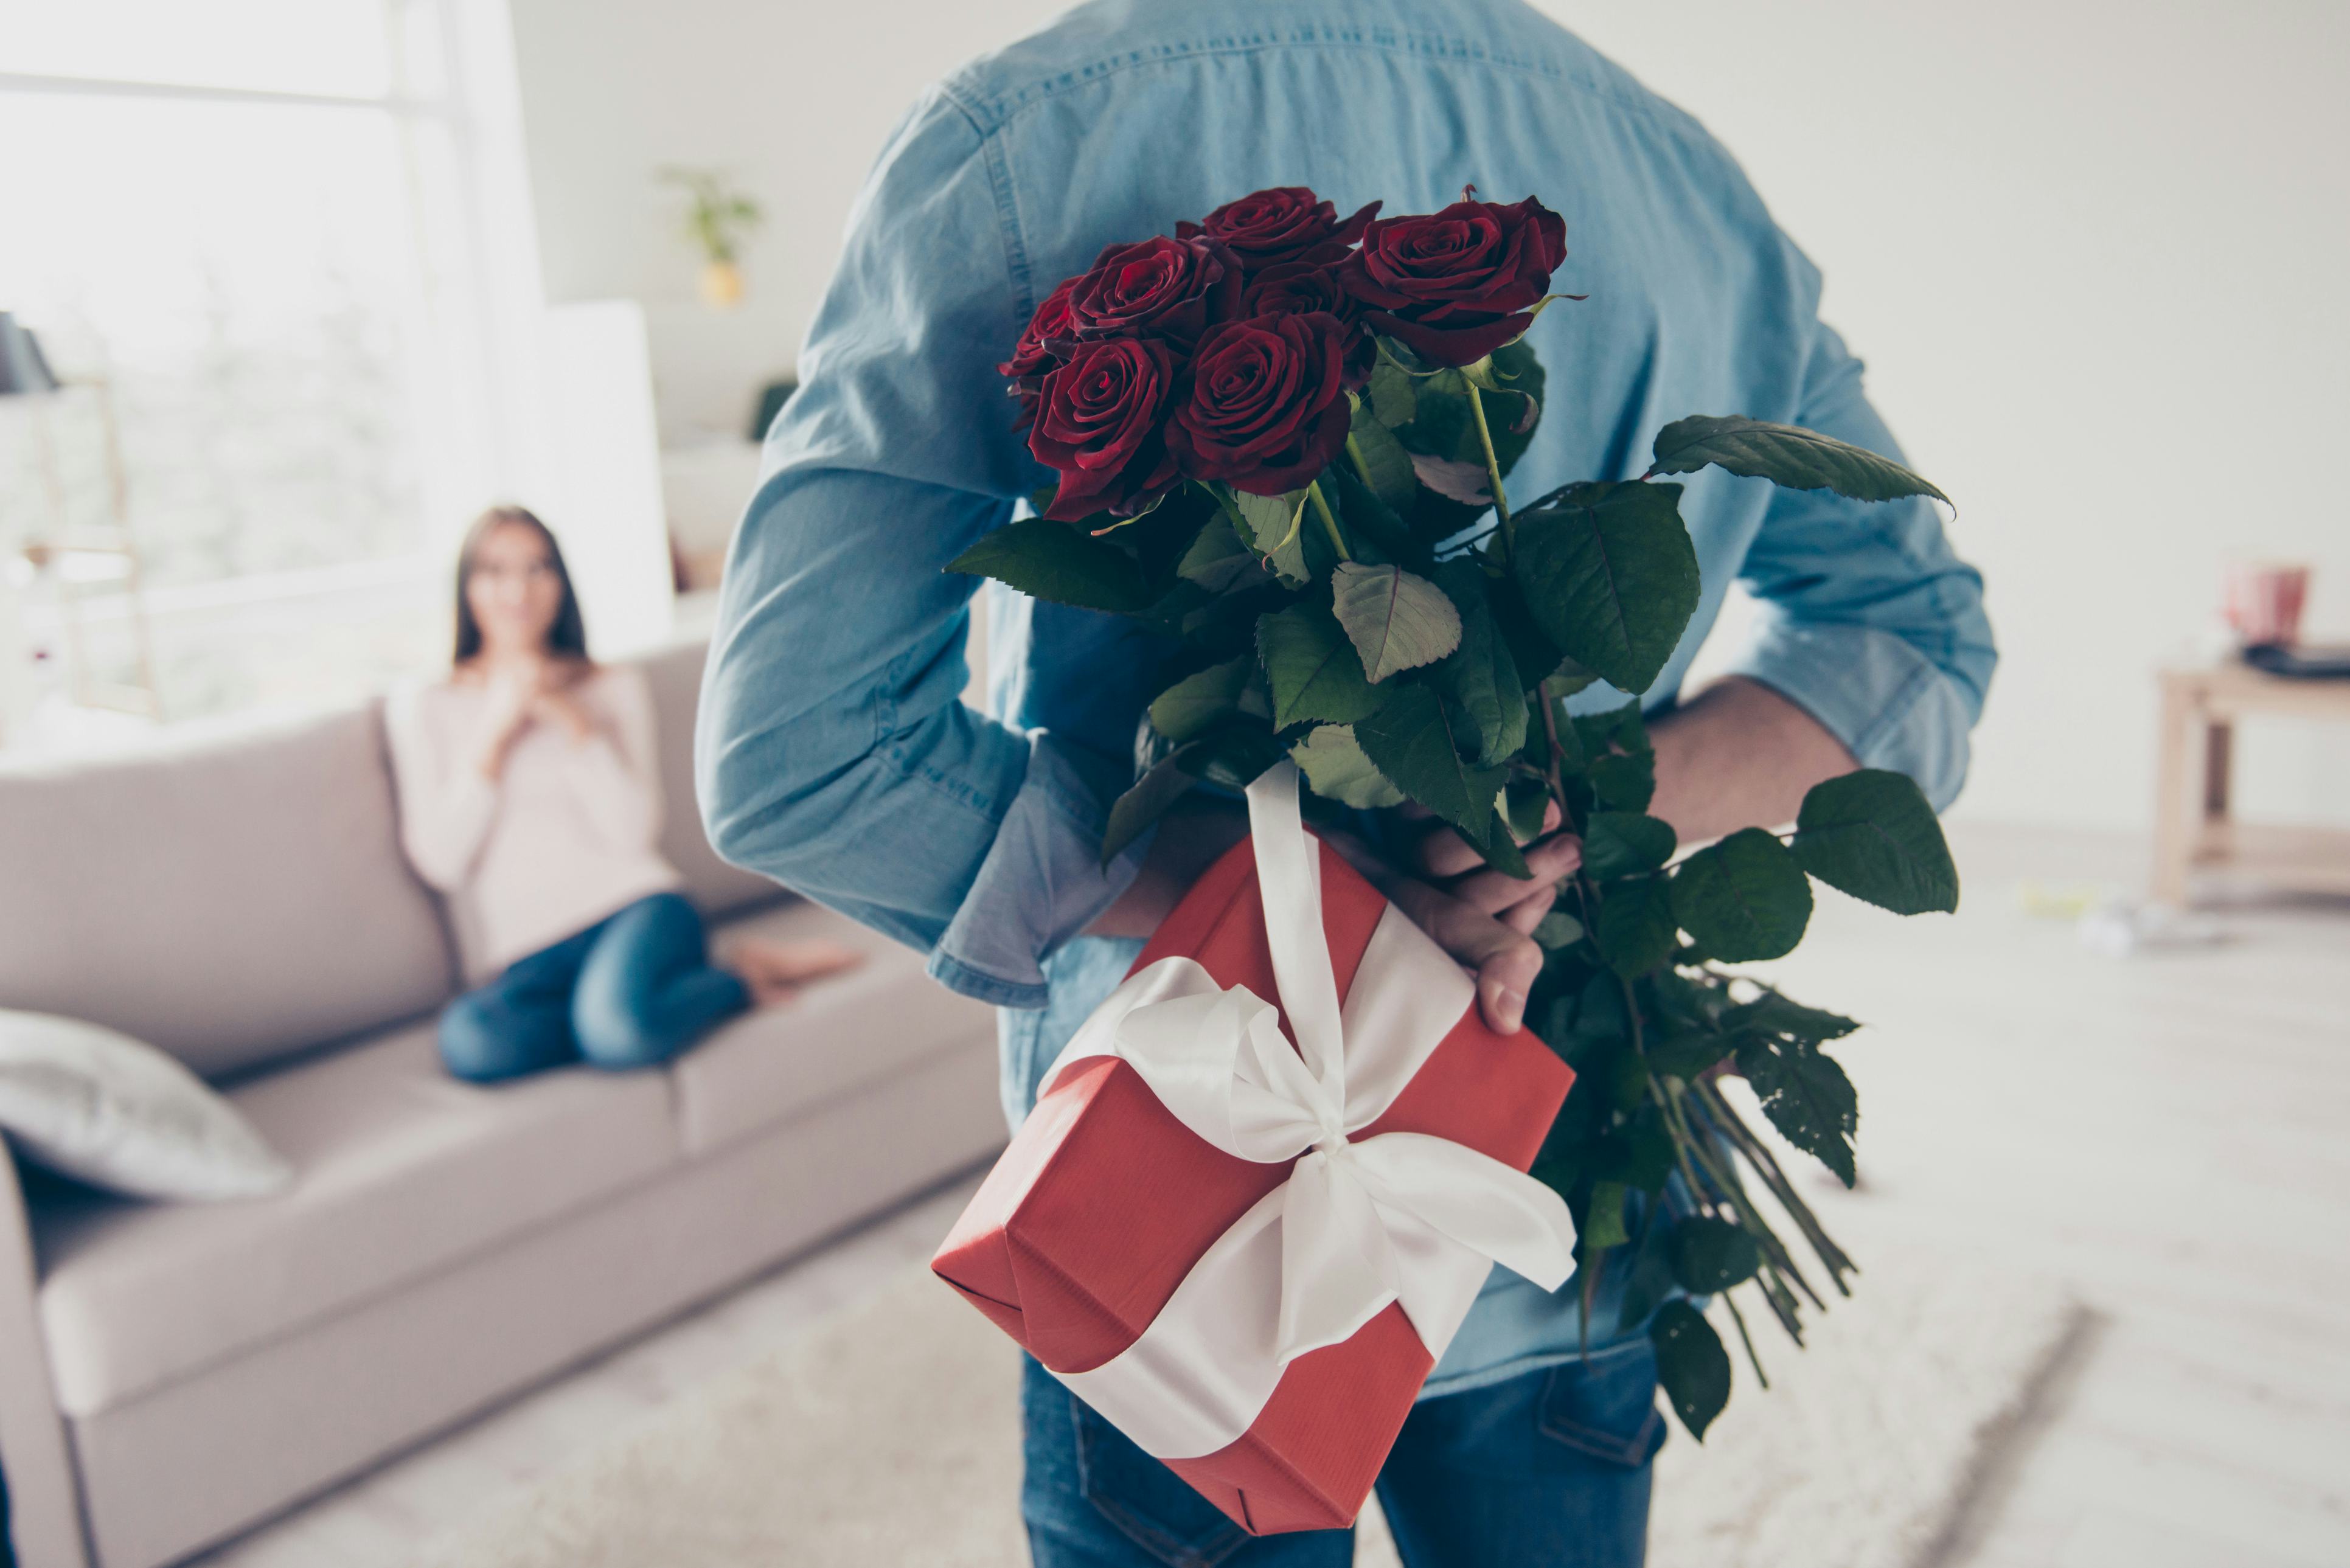 Man holding flowers and a gift behind his back while facing a women sitting on a couch